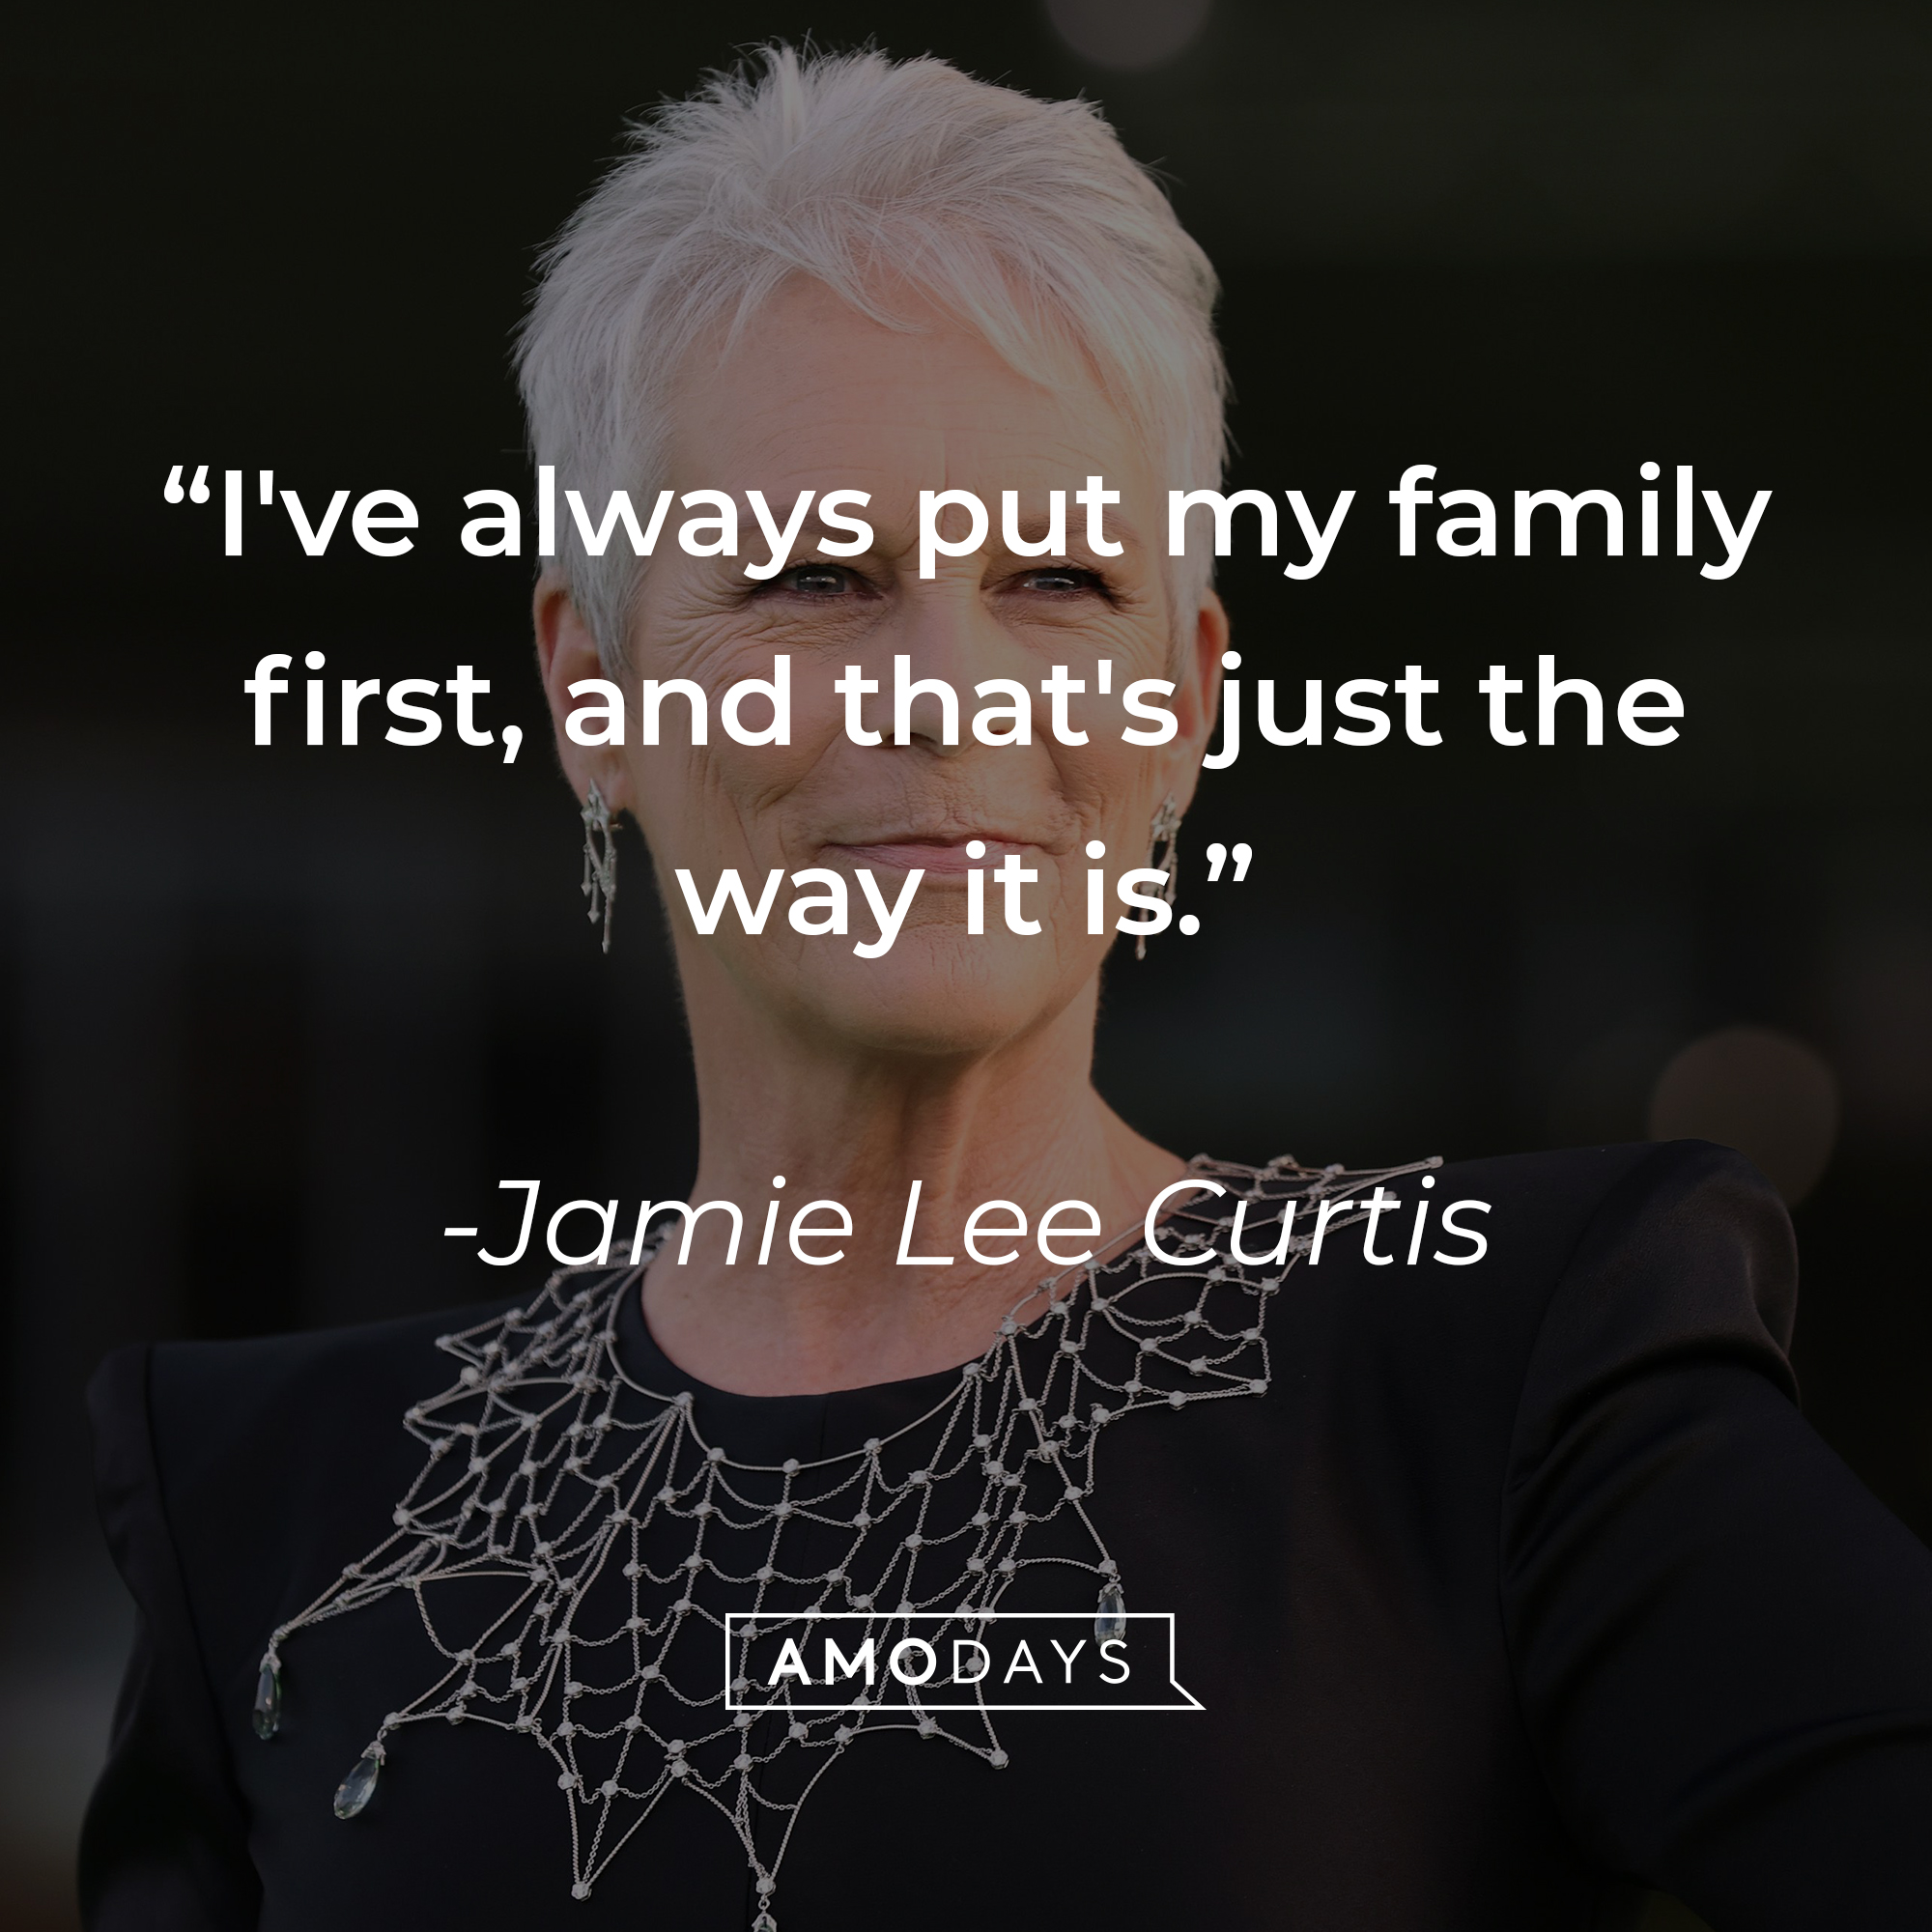 An image of Jamie Lee Curtis, with her quote: “I've always put my family first, and that's just the way it is.”  | Source: Getty Images